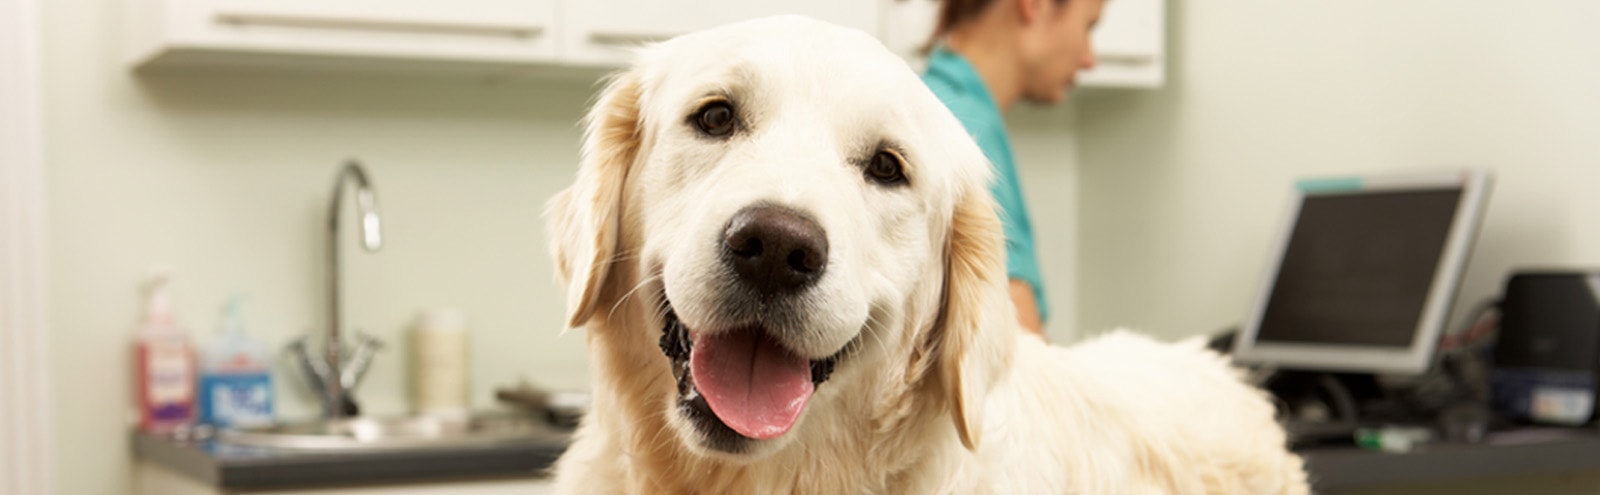 Latest news from West Midlands Veterinary Referrals